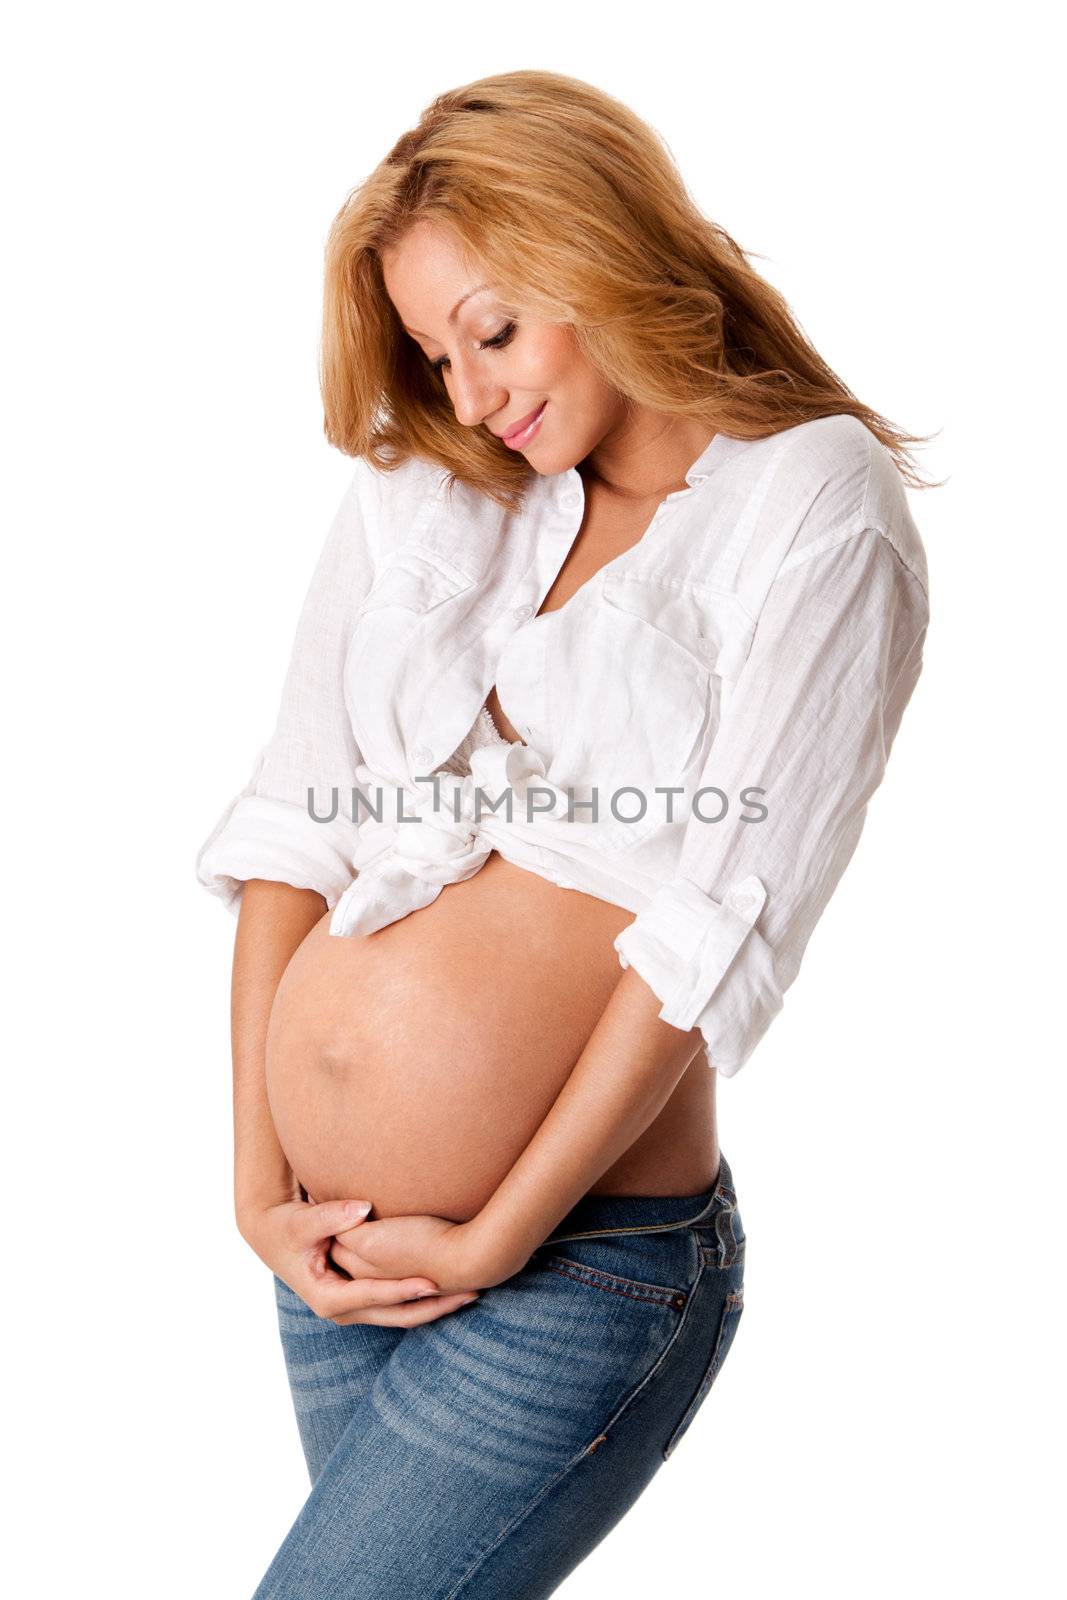 Beautiful new happy mother in late pregnancy wearing fashion jeans and white, looking at tummy holding belly, isolated.